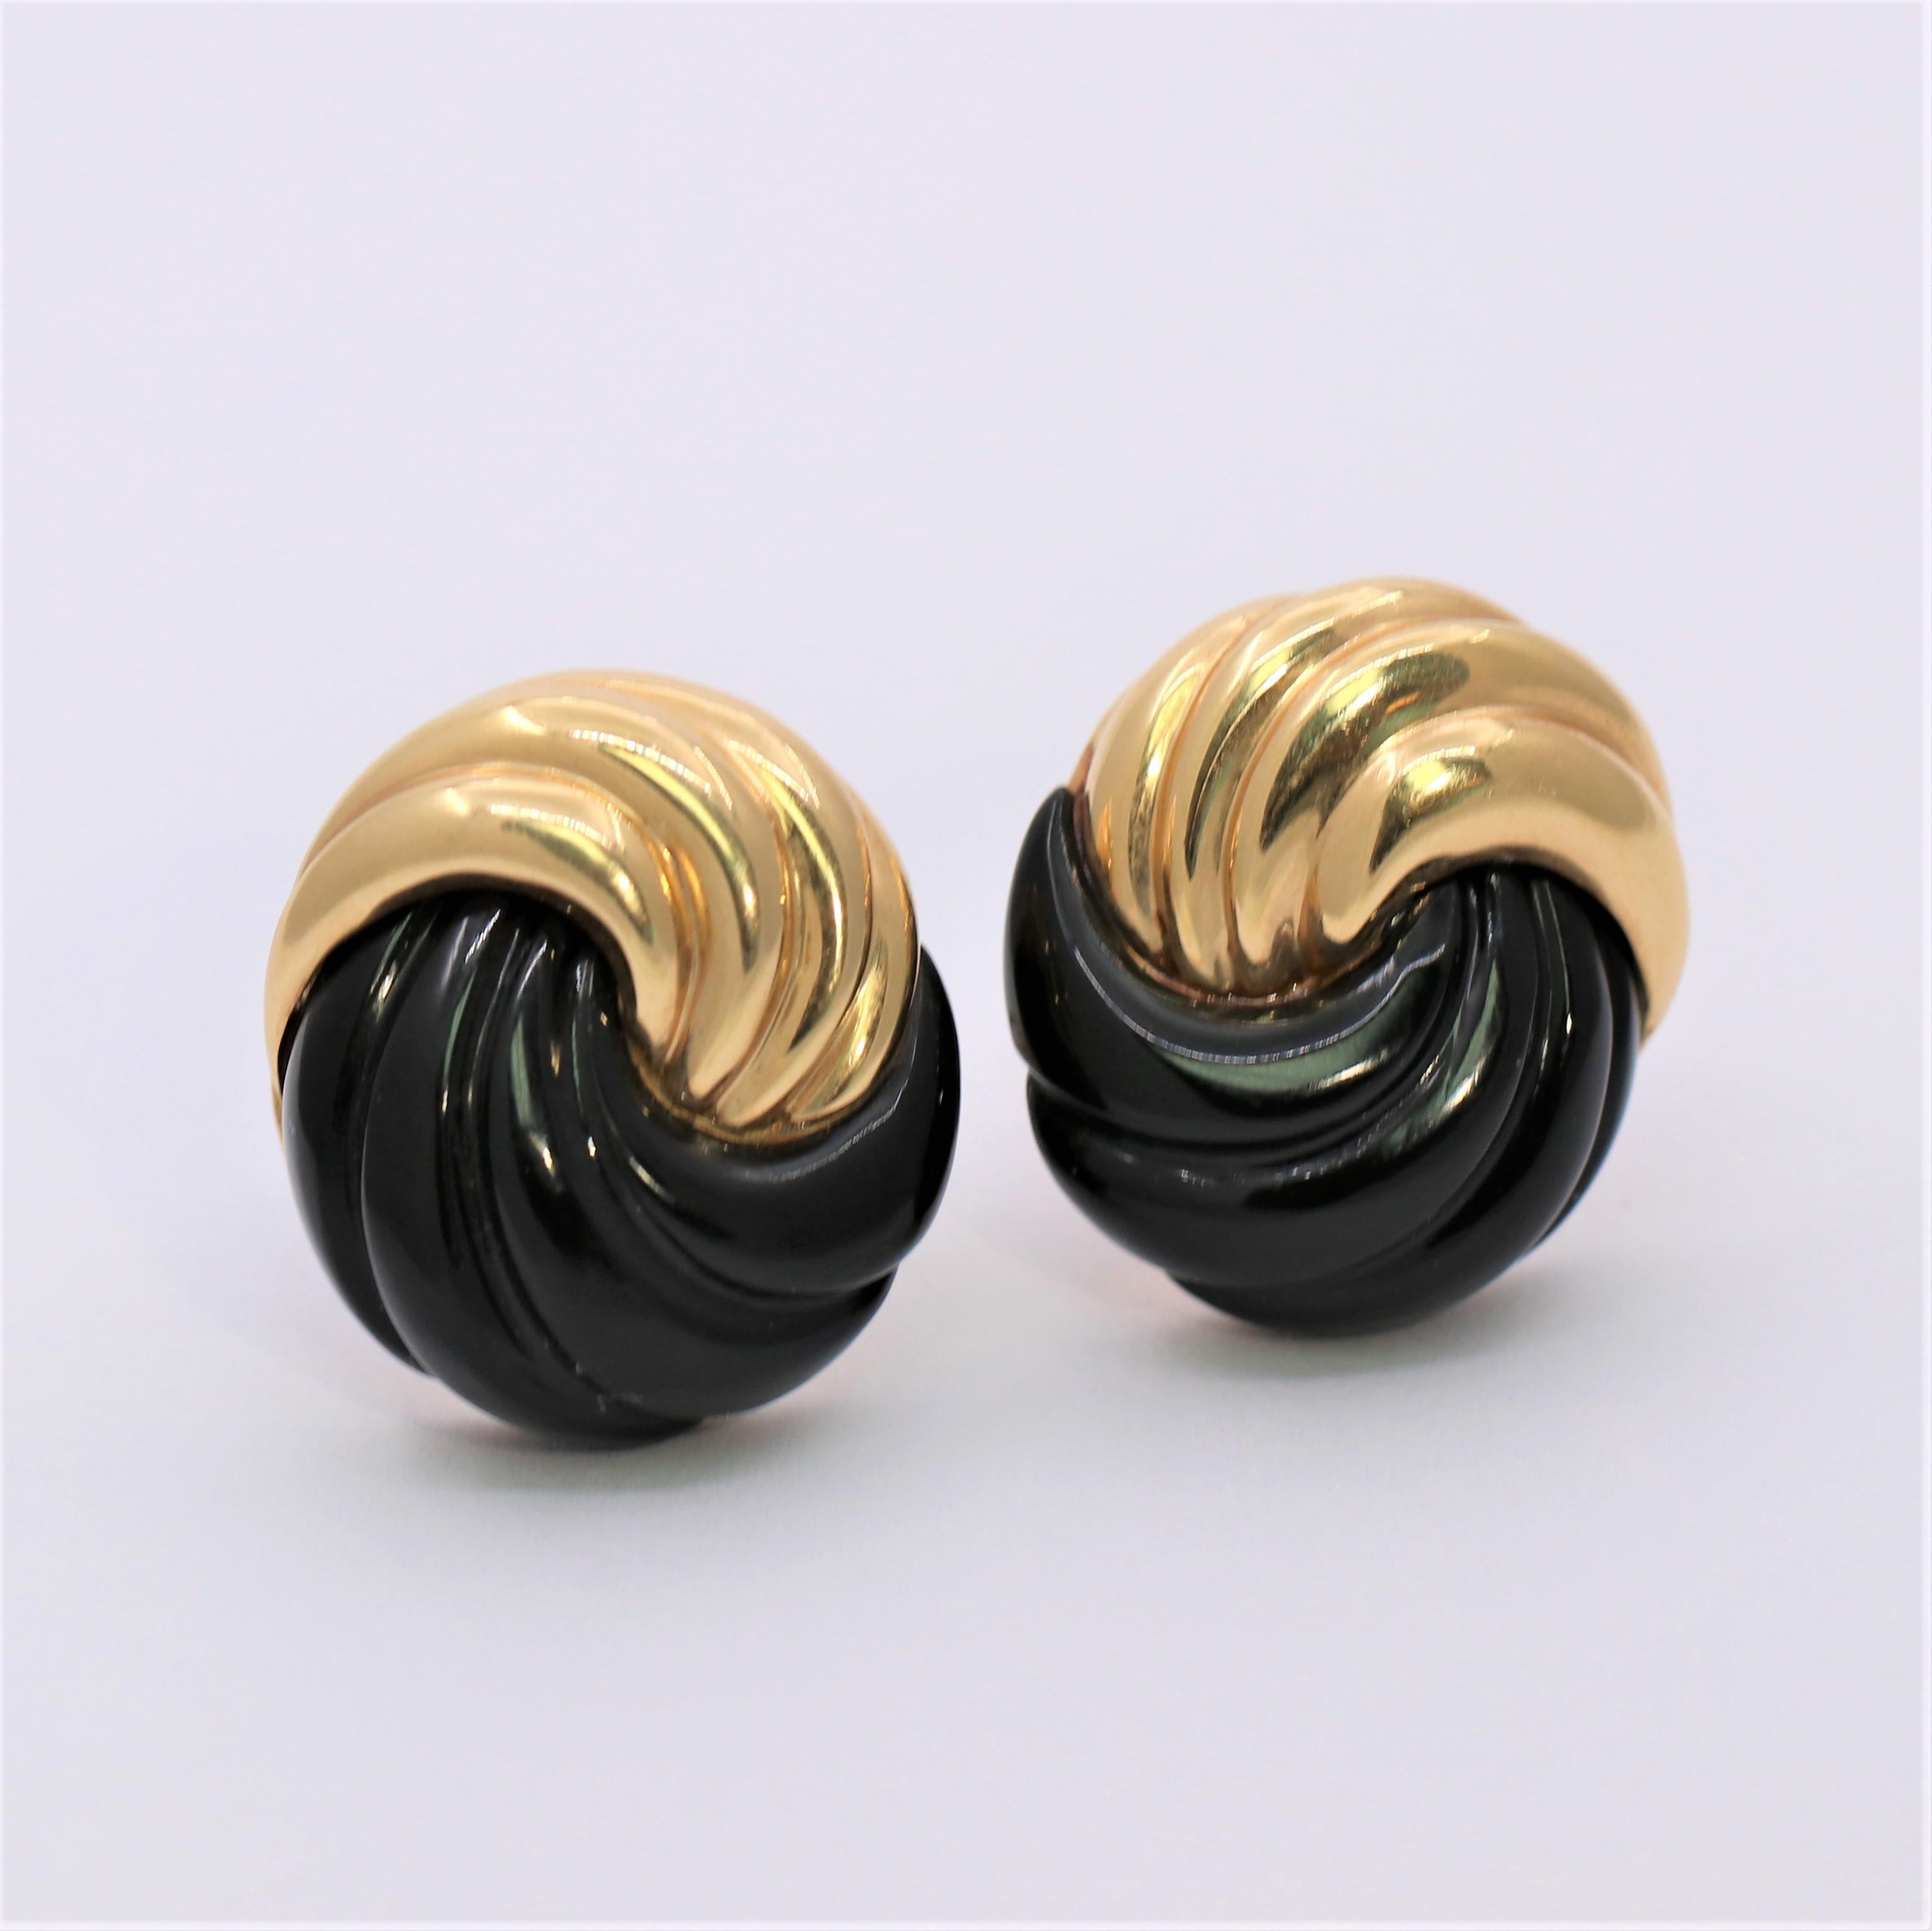 Made by designer MAZ, this classic knot design pair of earrings is crafted in fluted, 14K Yellow Gold and fluted, black onyx sections. The graceful flow  is seamless and creates a beautiful visual as well as  a sense of delicate motion. Measures 1